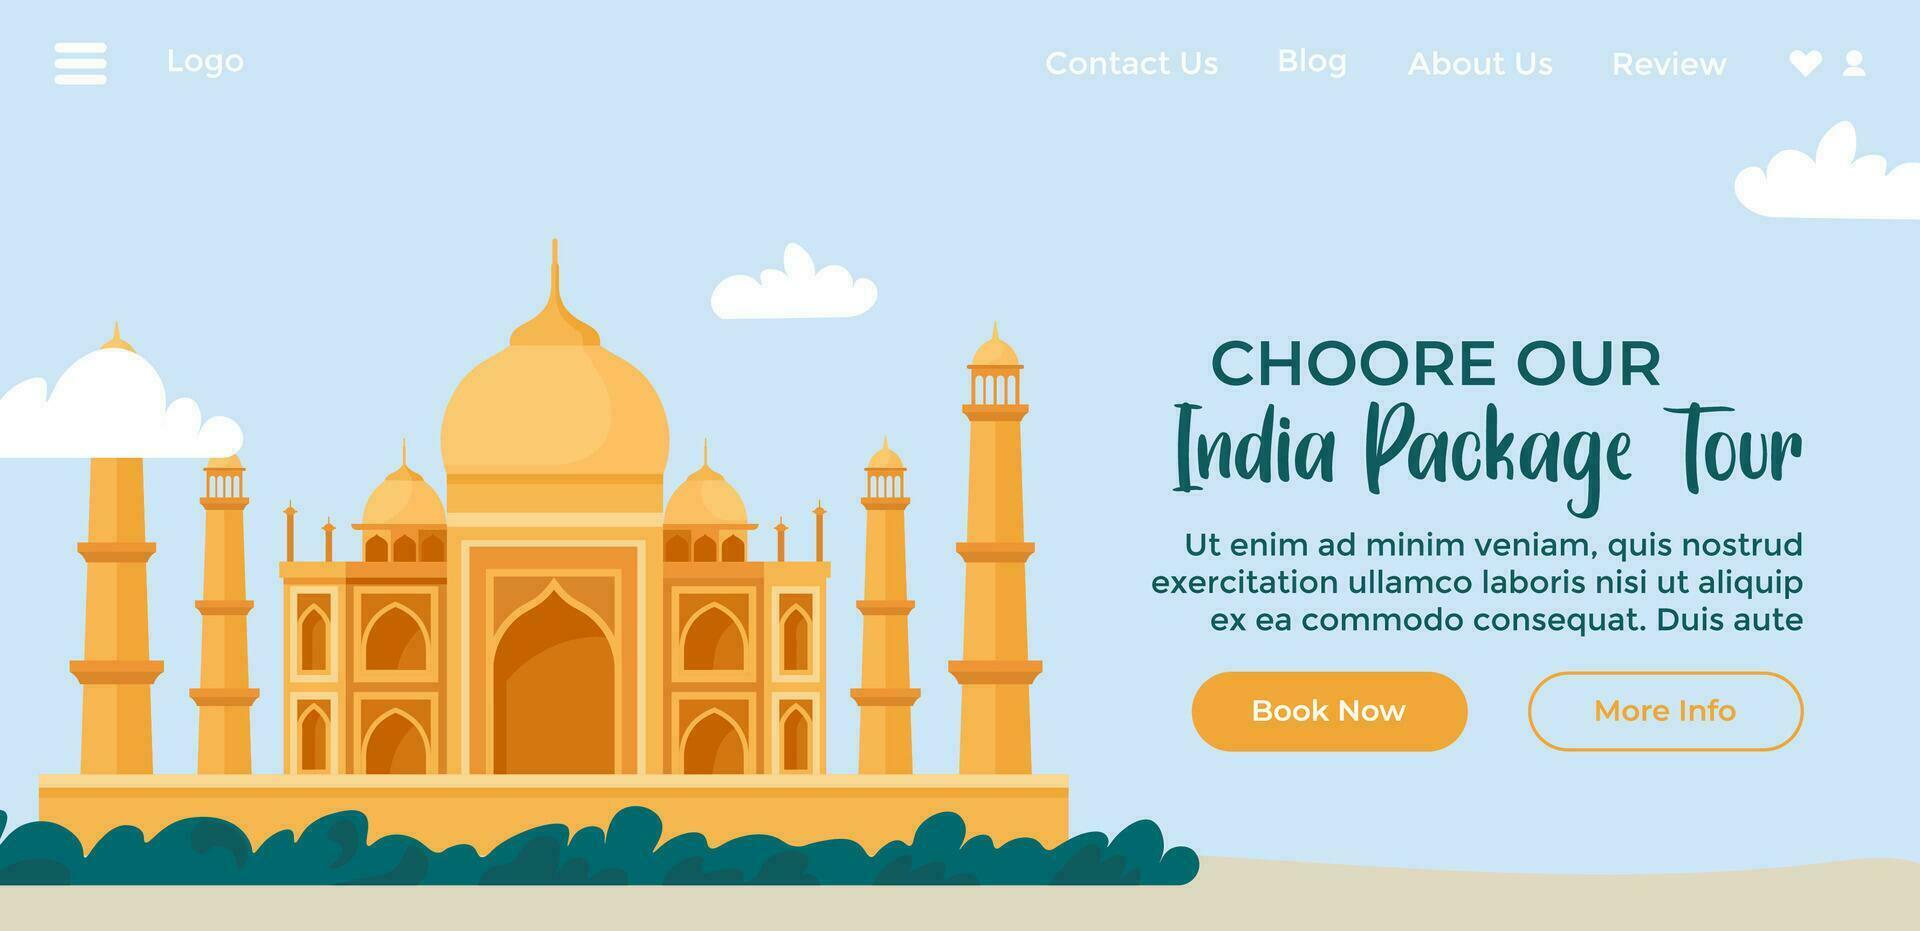 Choose our India packages tours, website page vector